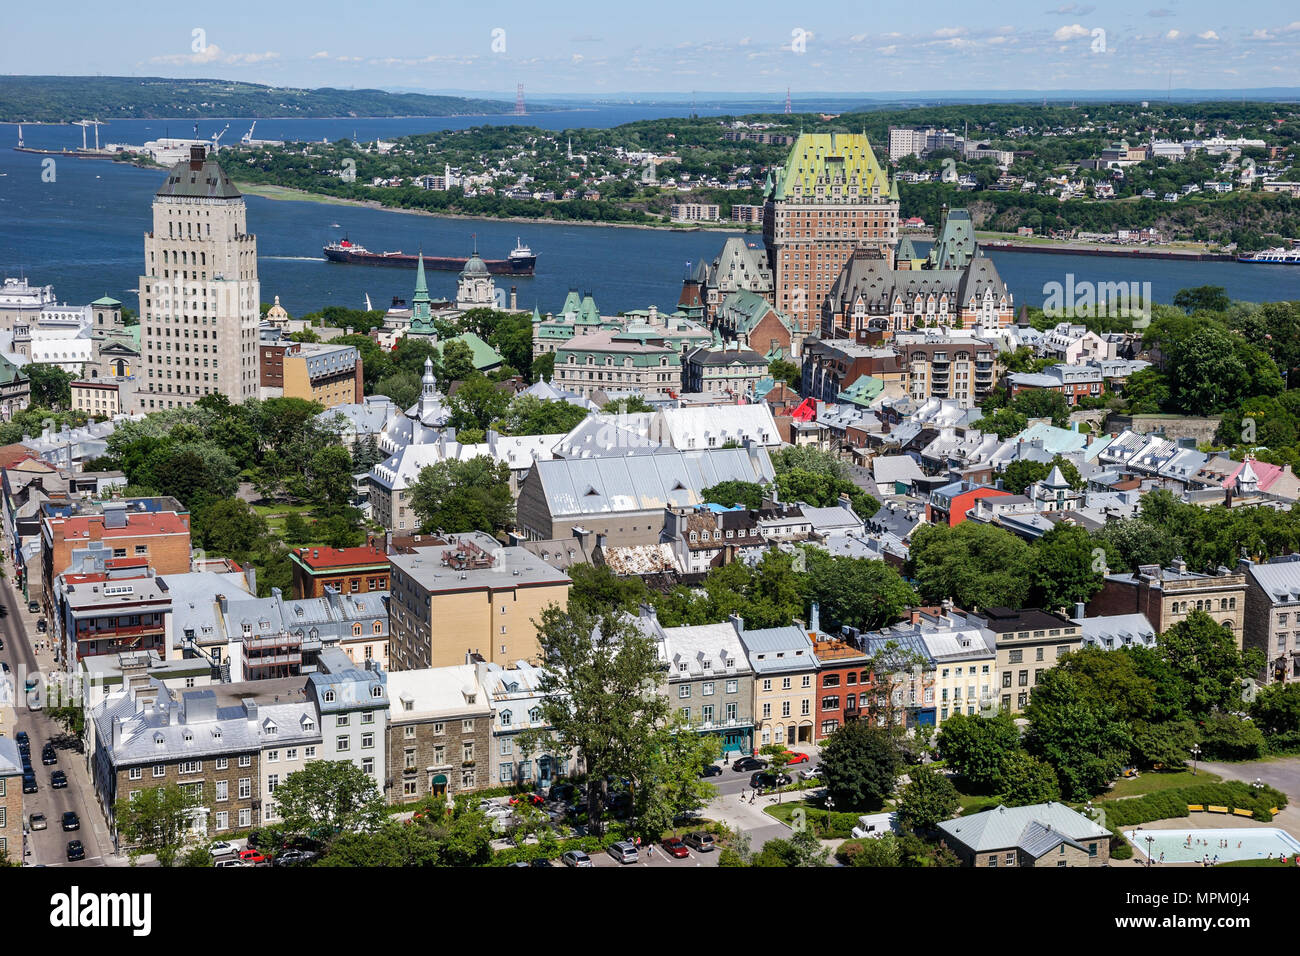 Quebec Canada,Upper Town,St. Lawrence River,Edifice Price,Fairmont Le Chateau Frontenac hotel,hotels,lodging,ship,boat,Canada070712155 Stock Photo